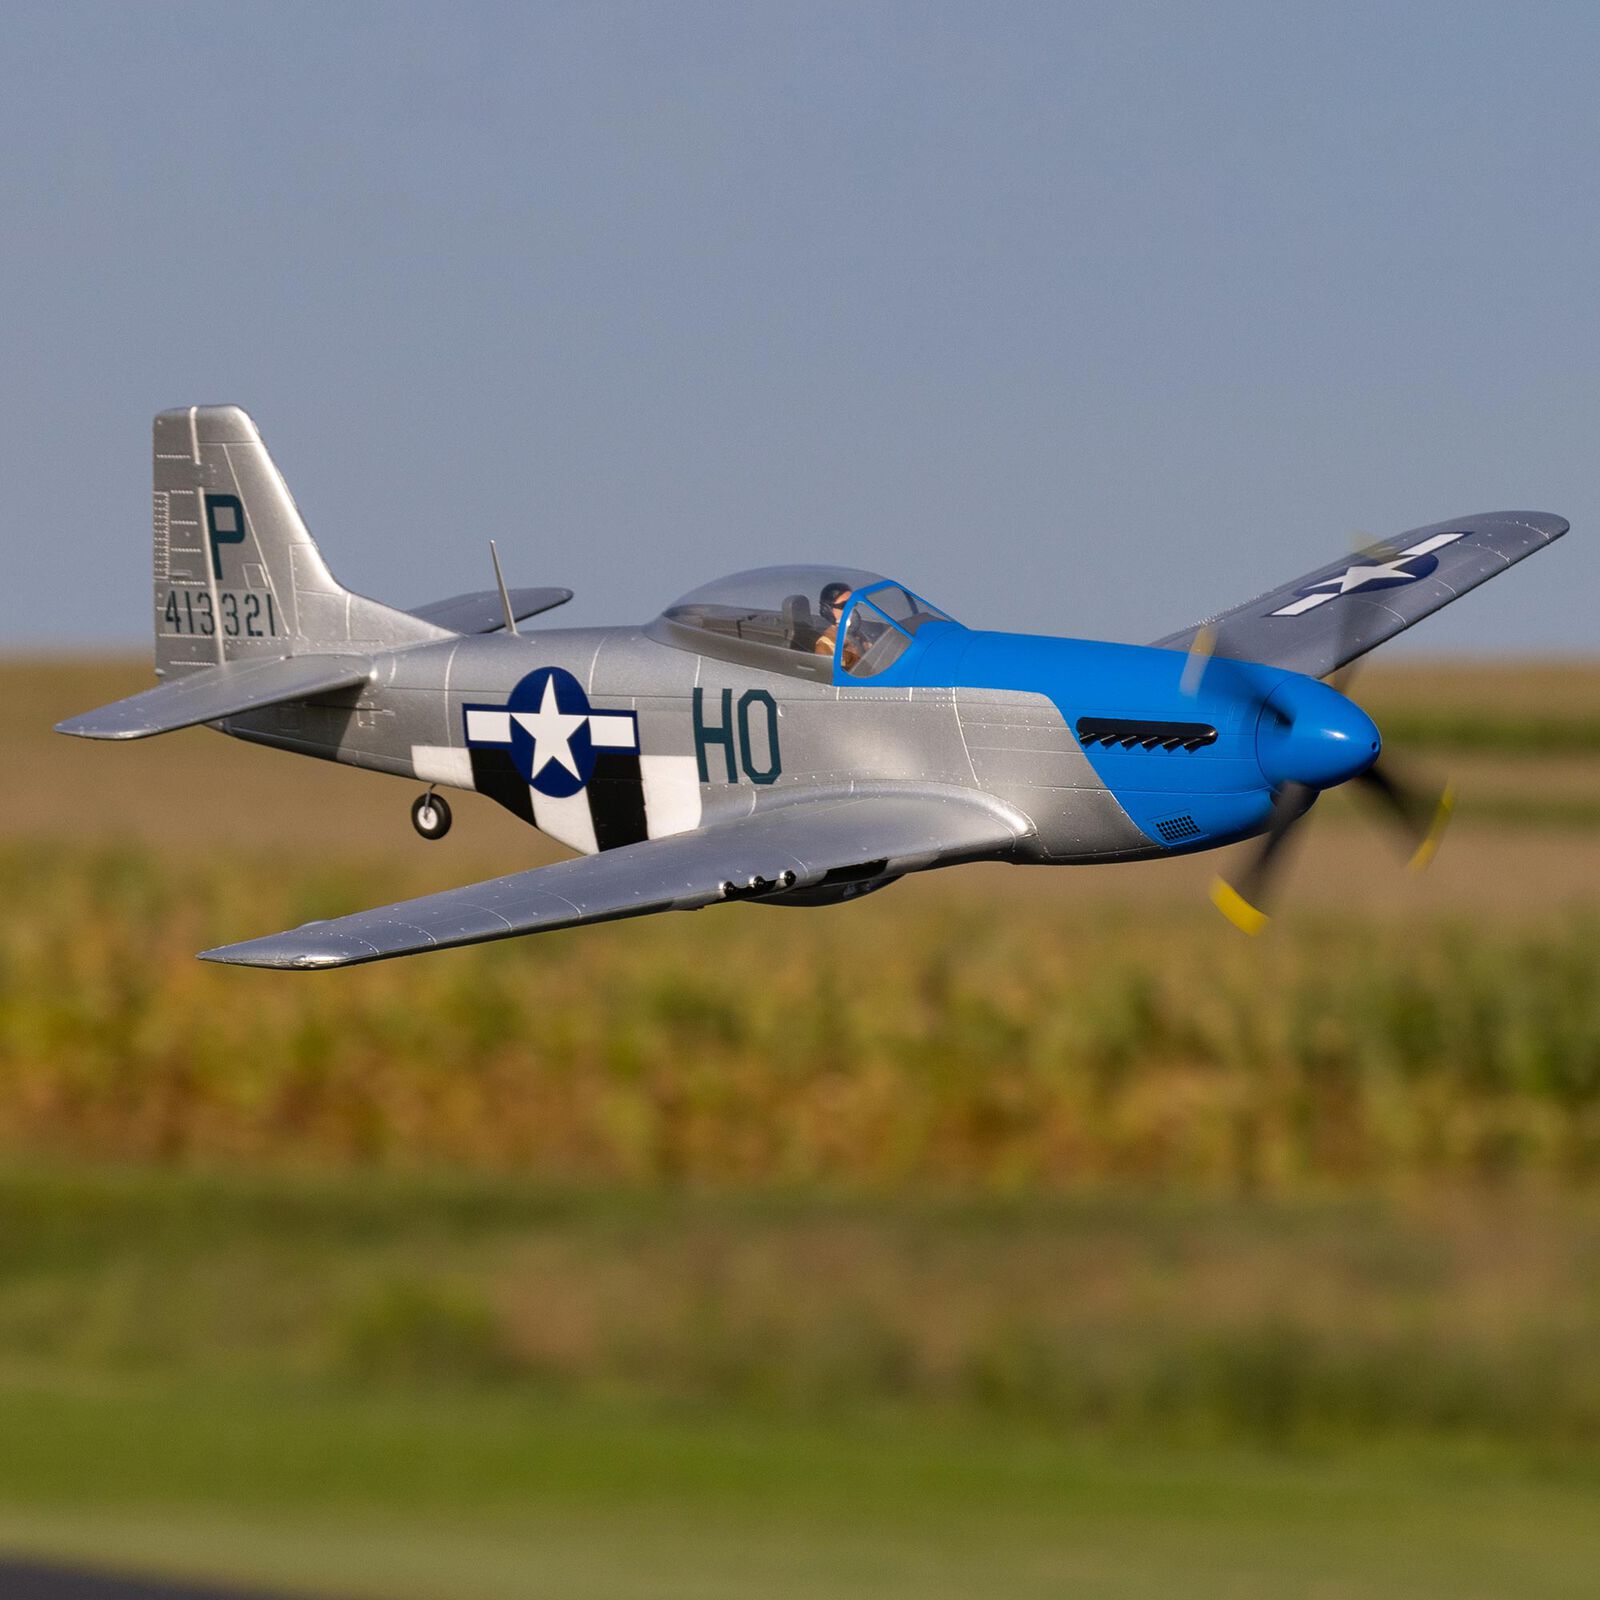 P-51D Mustang 1.2m Cripes A Mighty 3rd E-flite